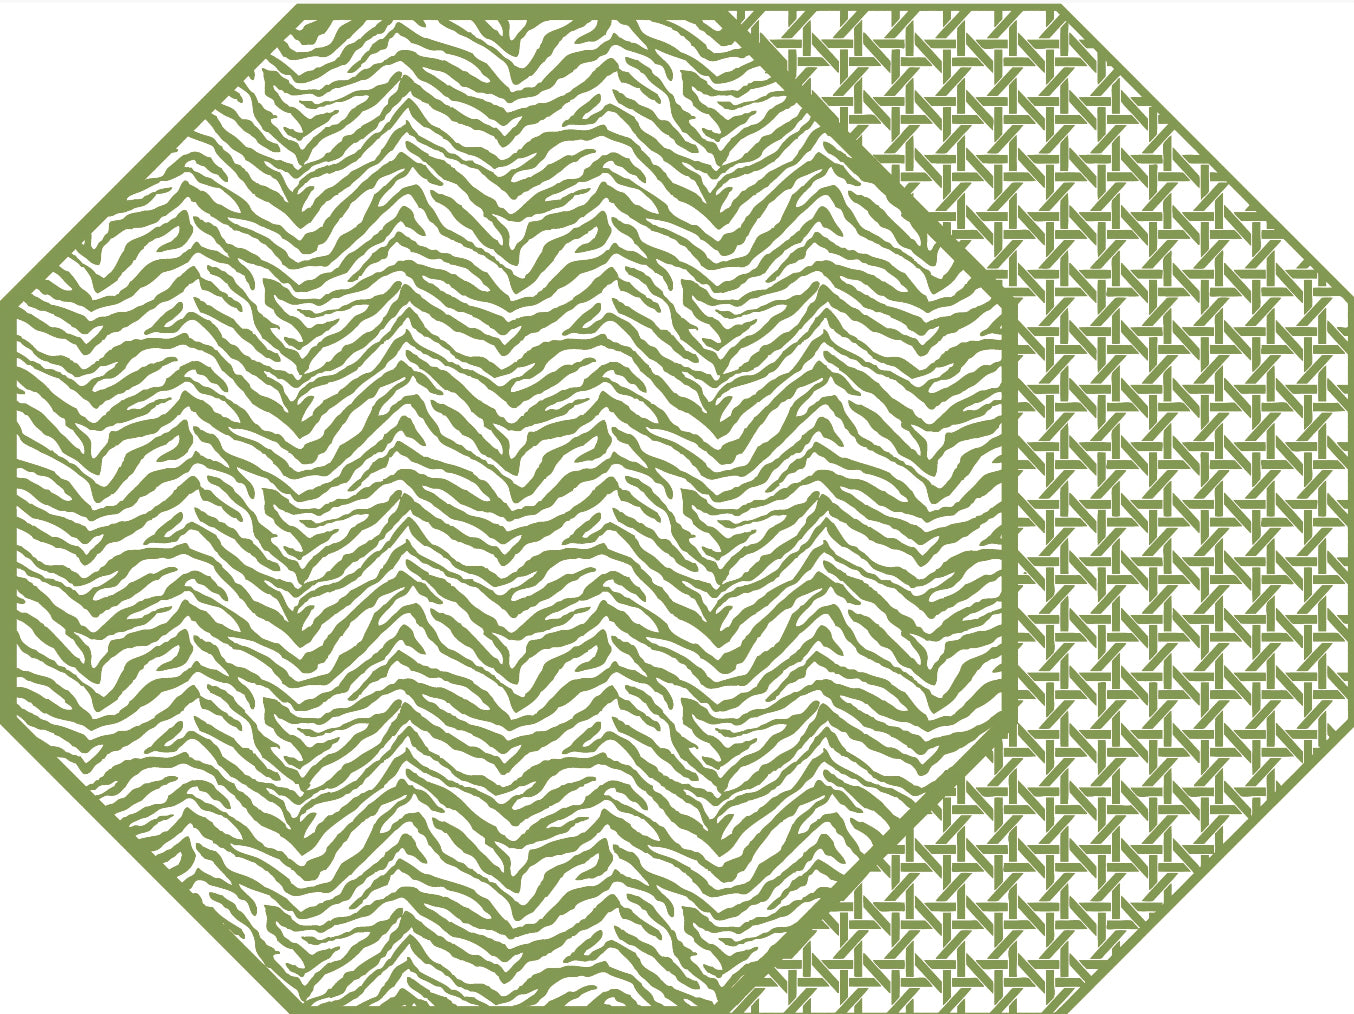 OCTAGONAL TWO SIDED ZEBRA PLACEMAT WITH CANE  ~ SAXON GREEN